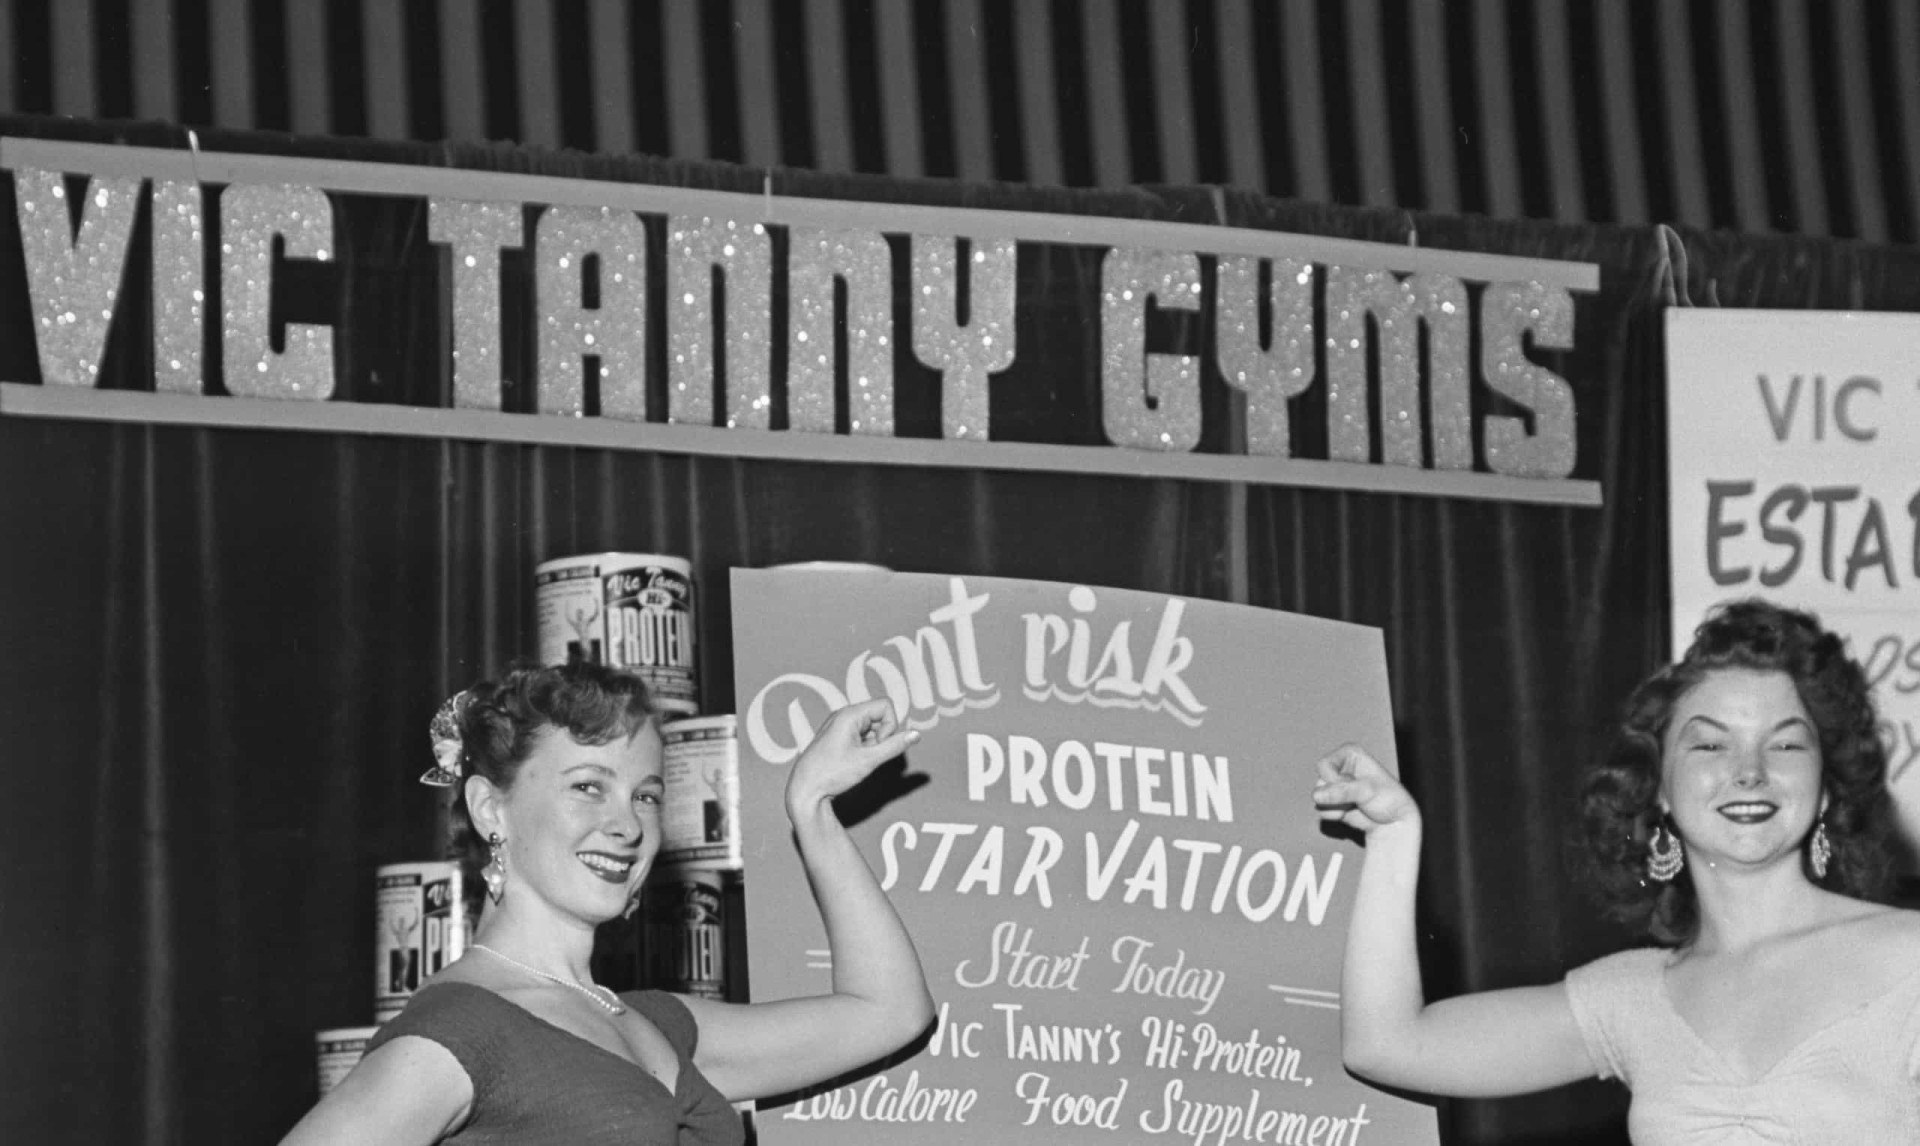 <p>In 1947, the first Vic Tanny Health Club opened, offering a new concept that catered to both men and women. Vic Tanny eventually expanded the business to over 100 clubs.</p>